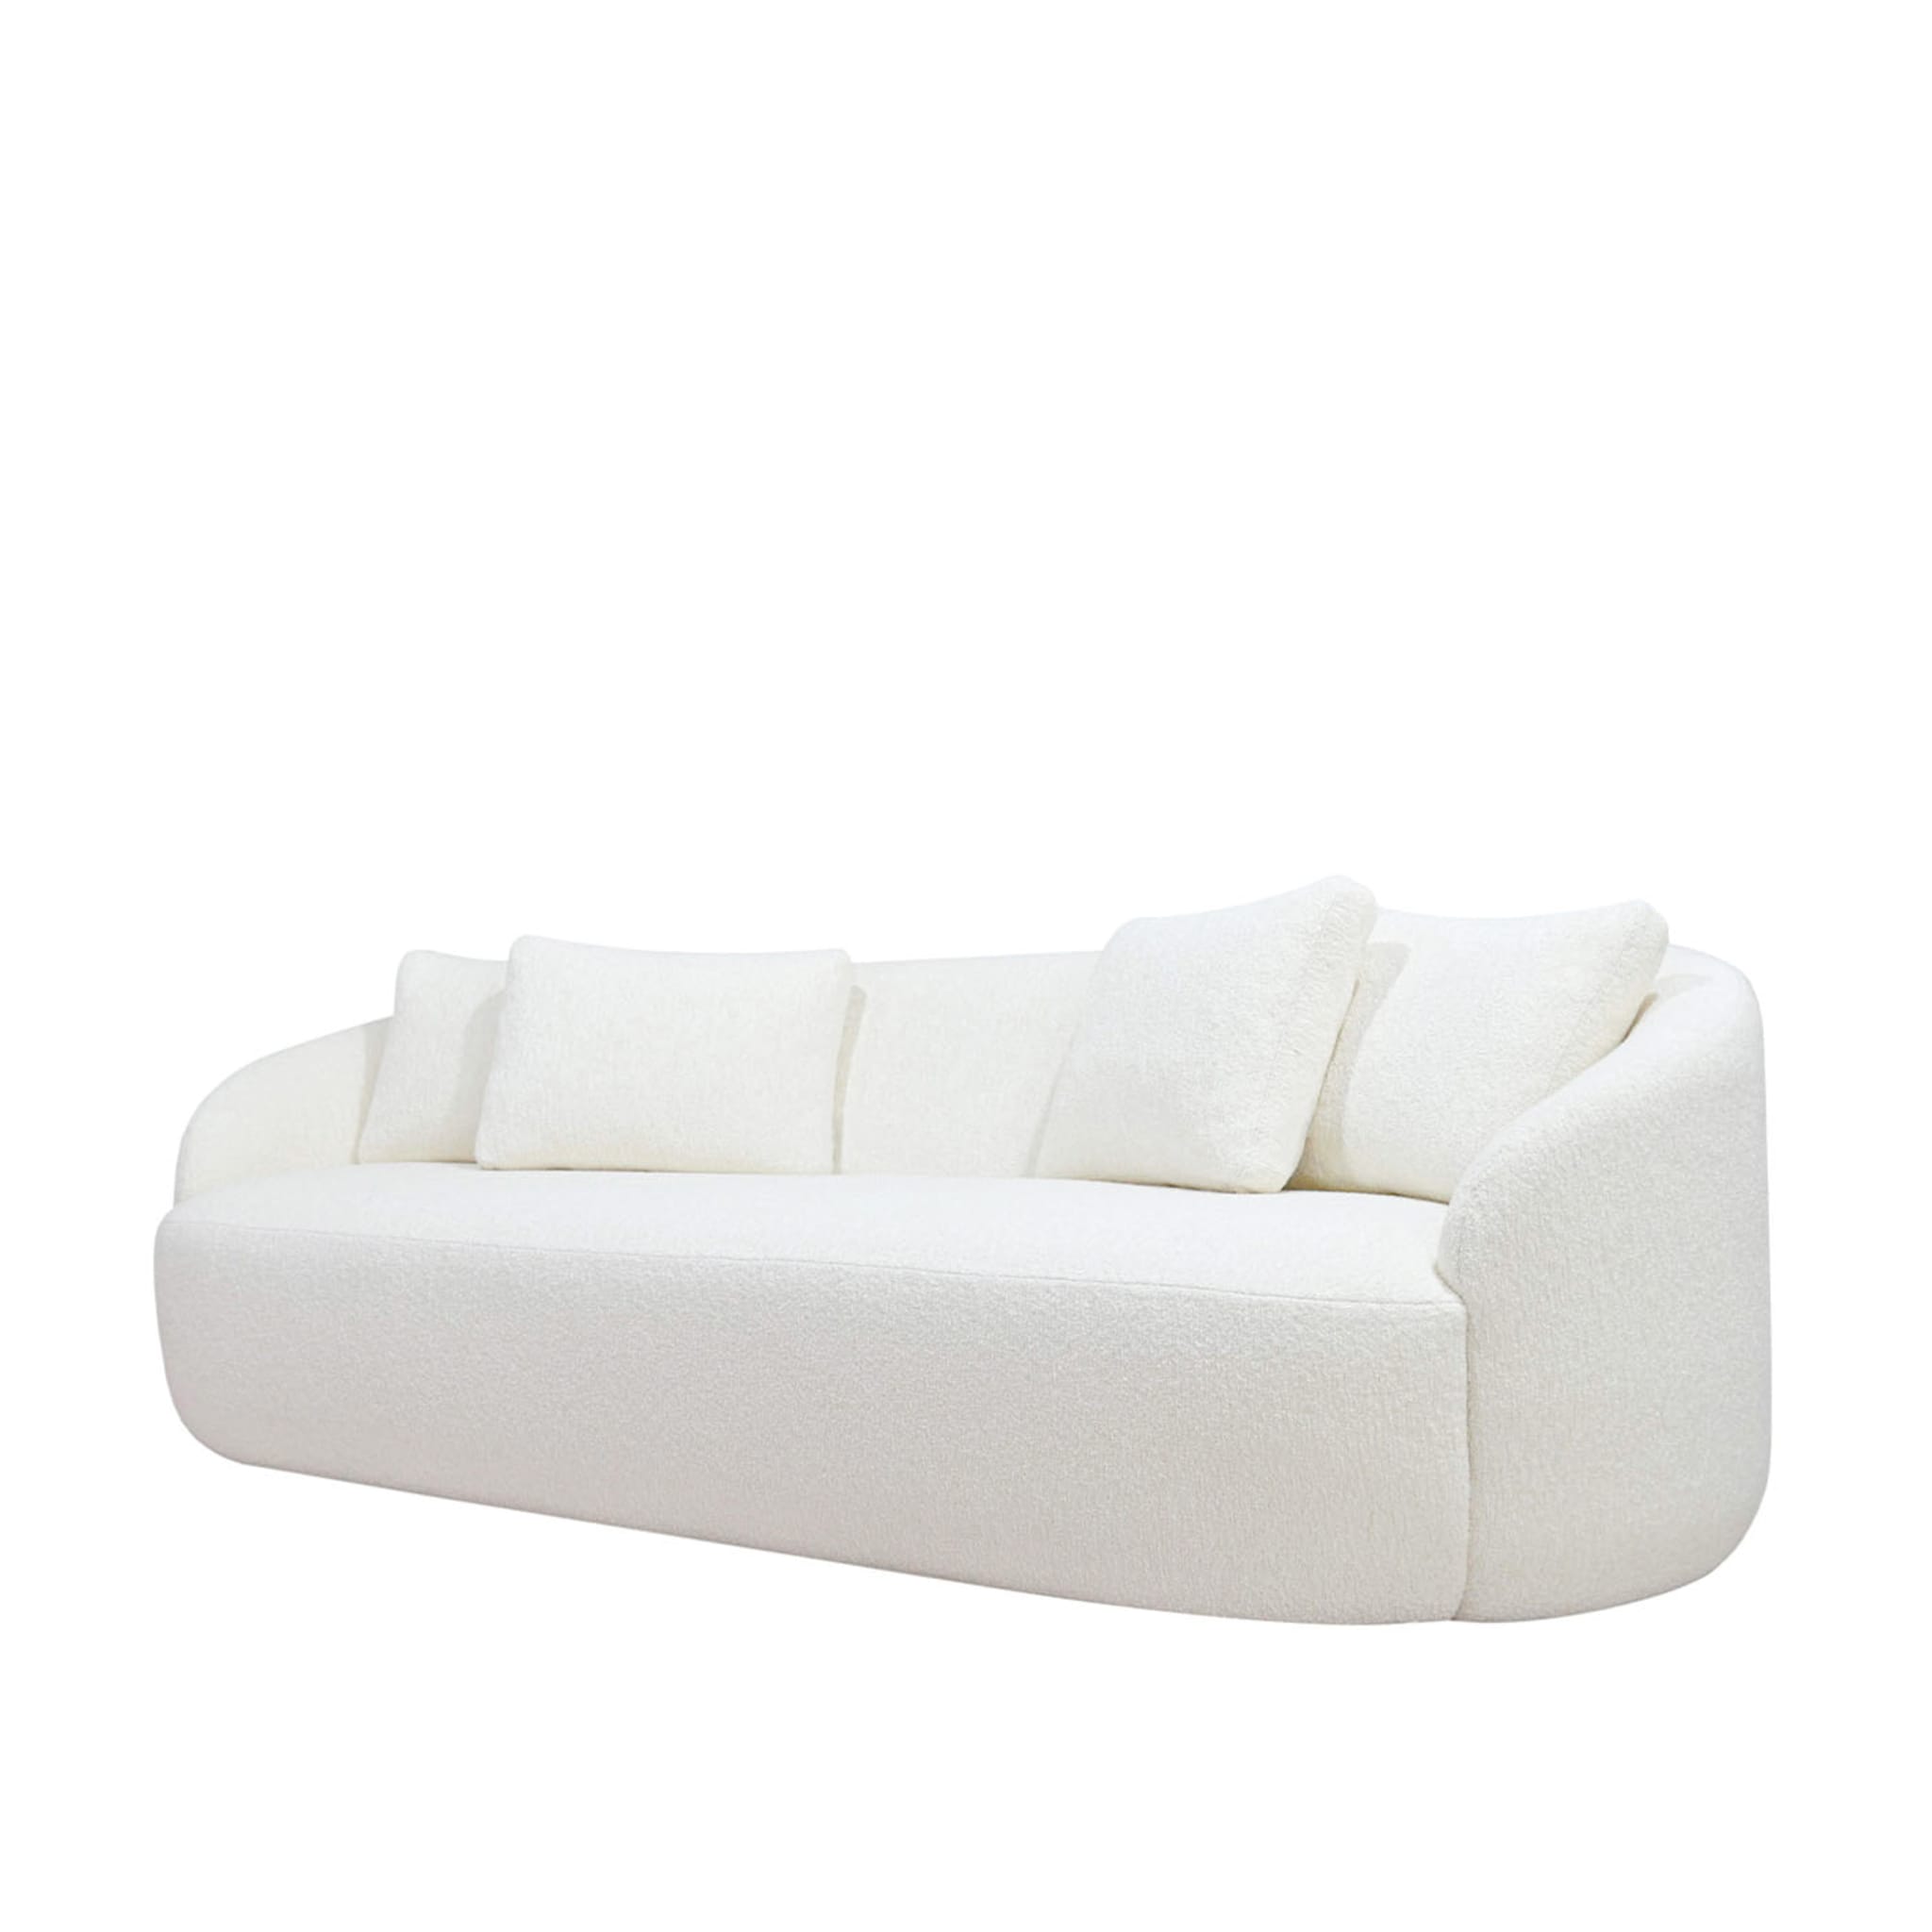 Cottonflower' Sofa 240 in White Boucle Fabric - Alternative view 1